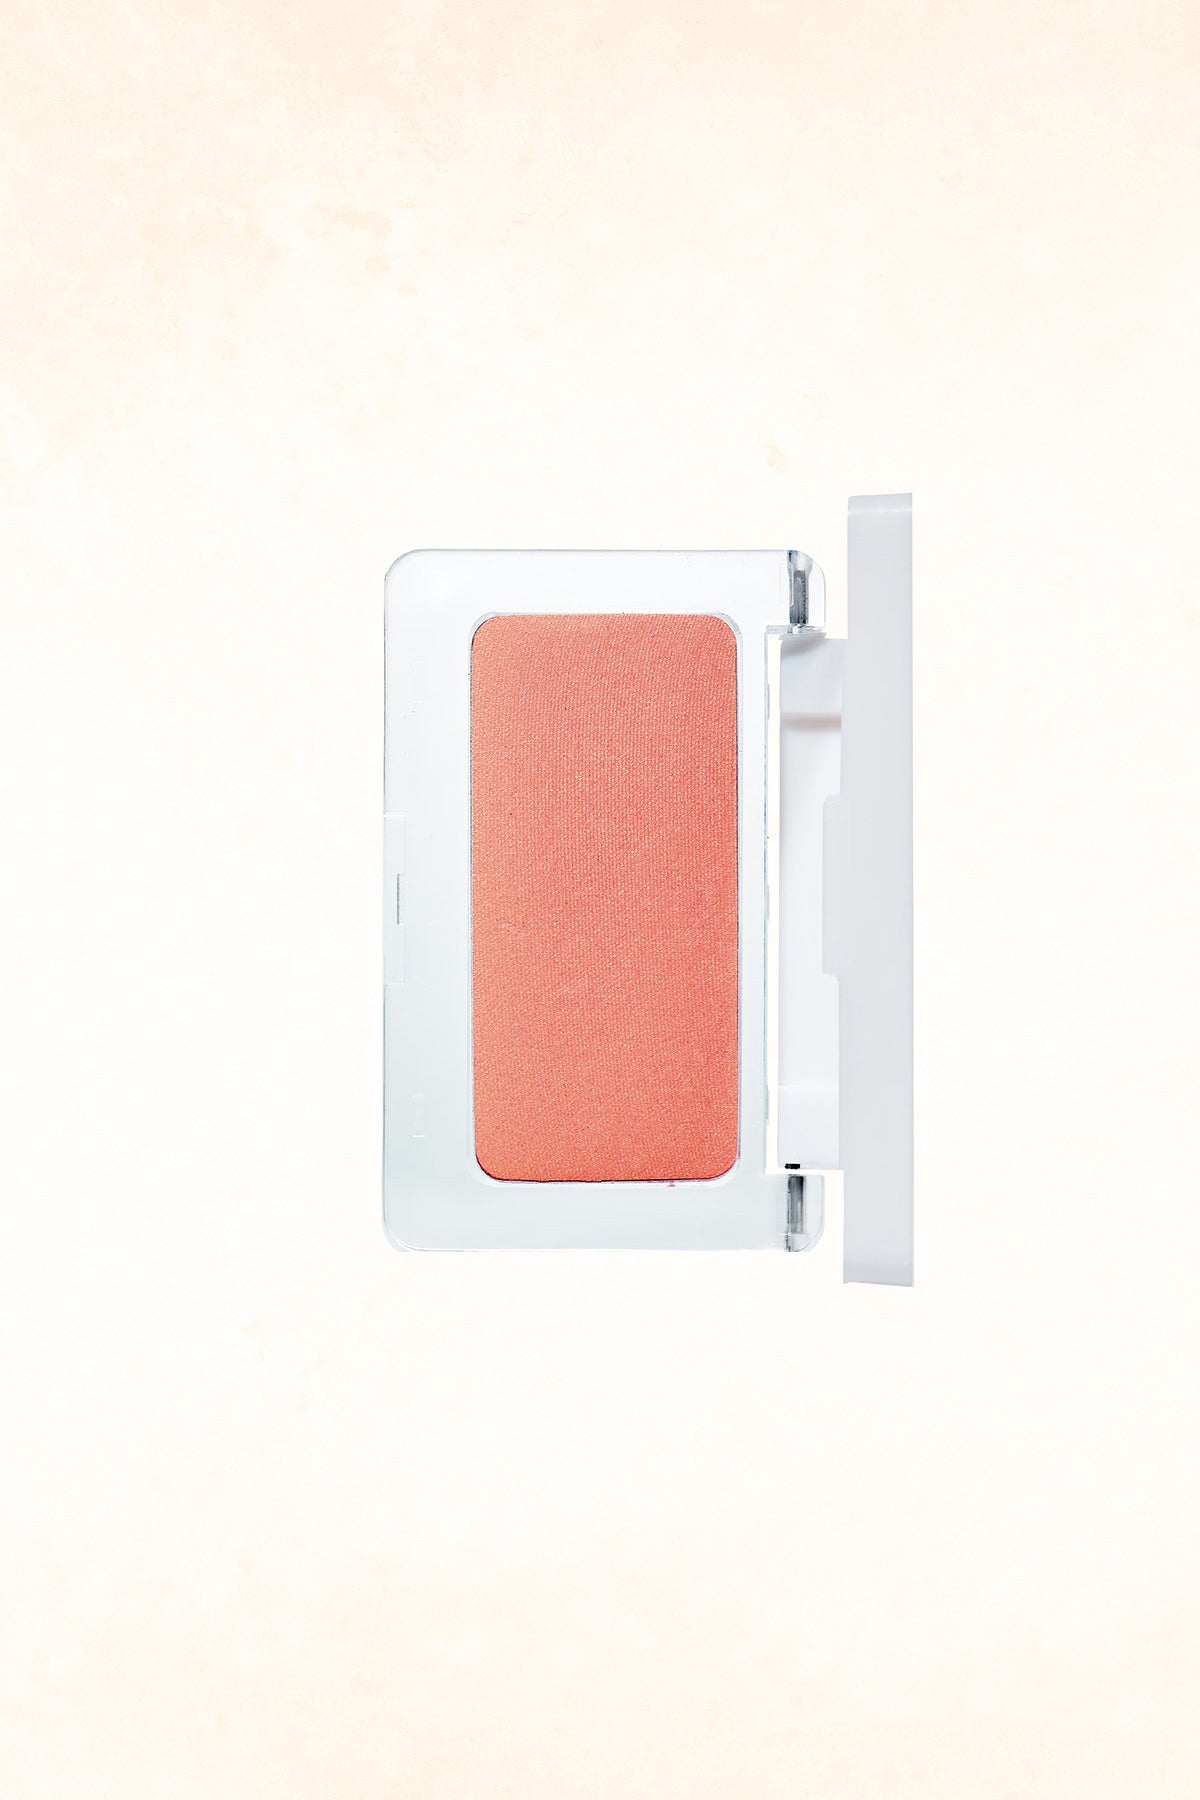 RMS Beauty – Pressed Blush – Lost Angel